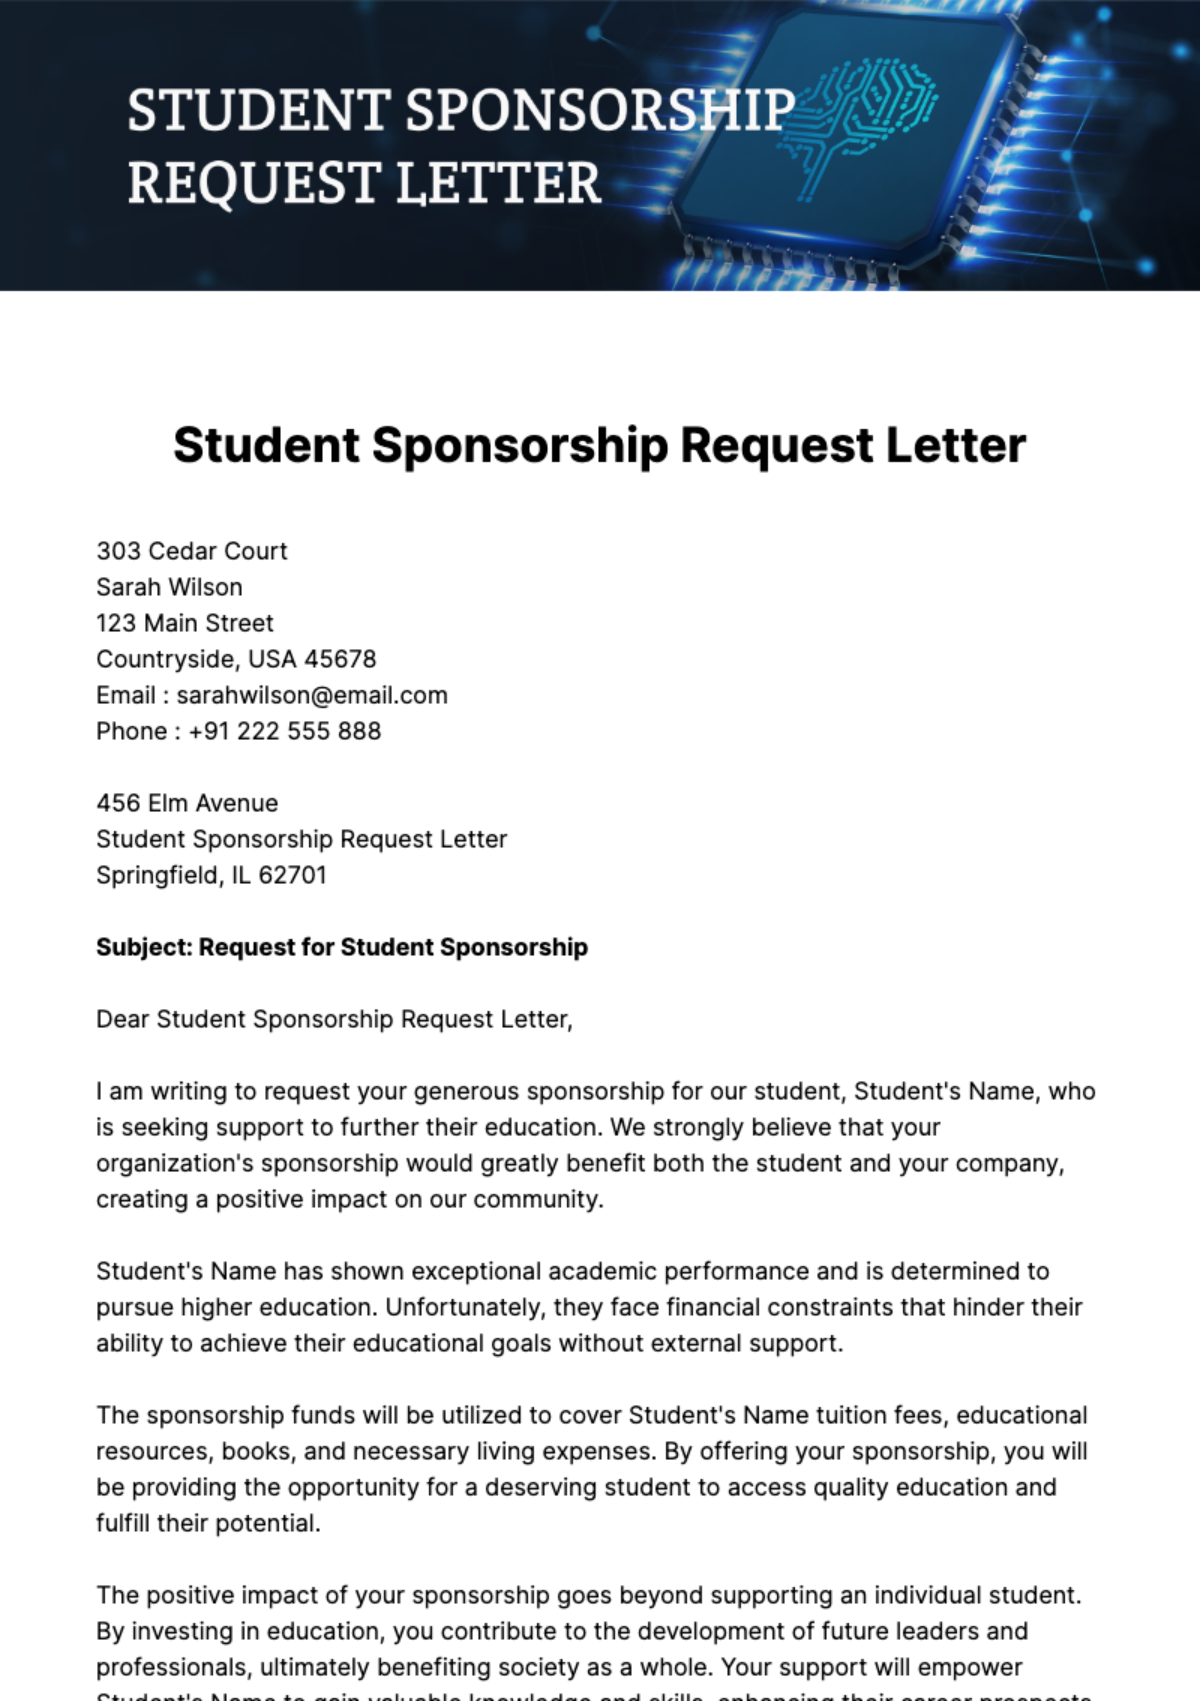 Free Student Sponsorship Request Letter Template